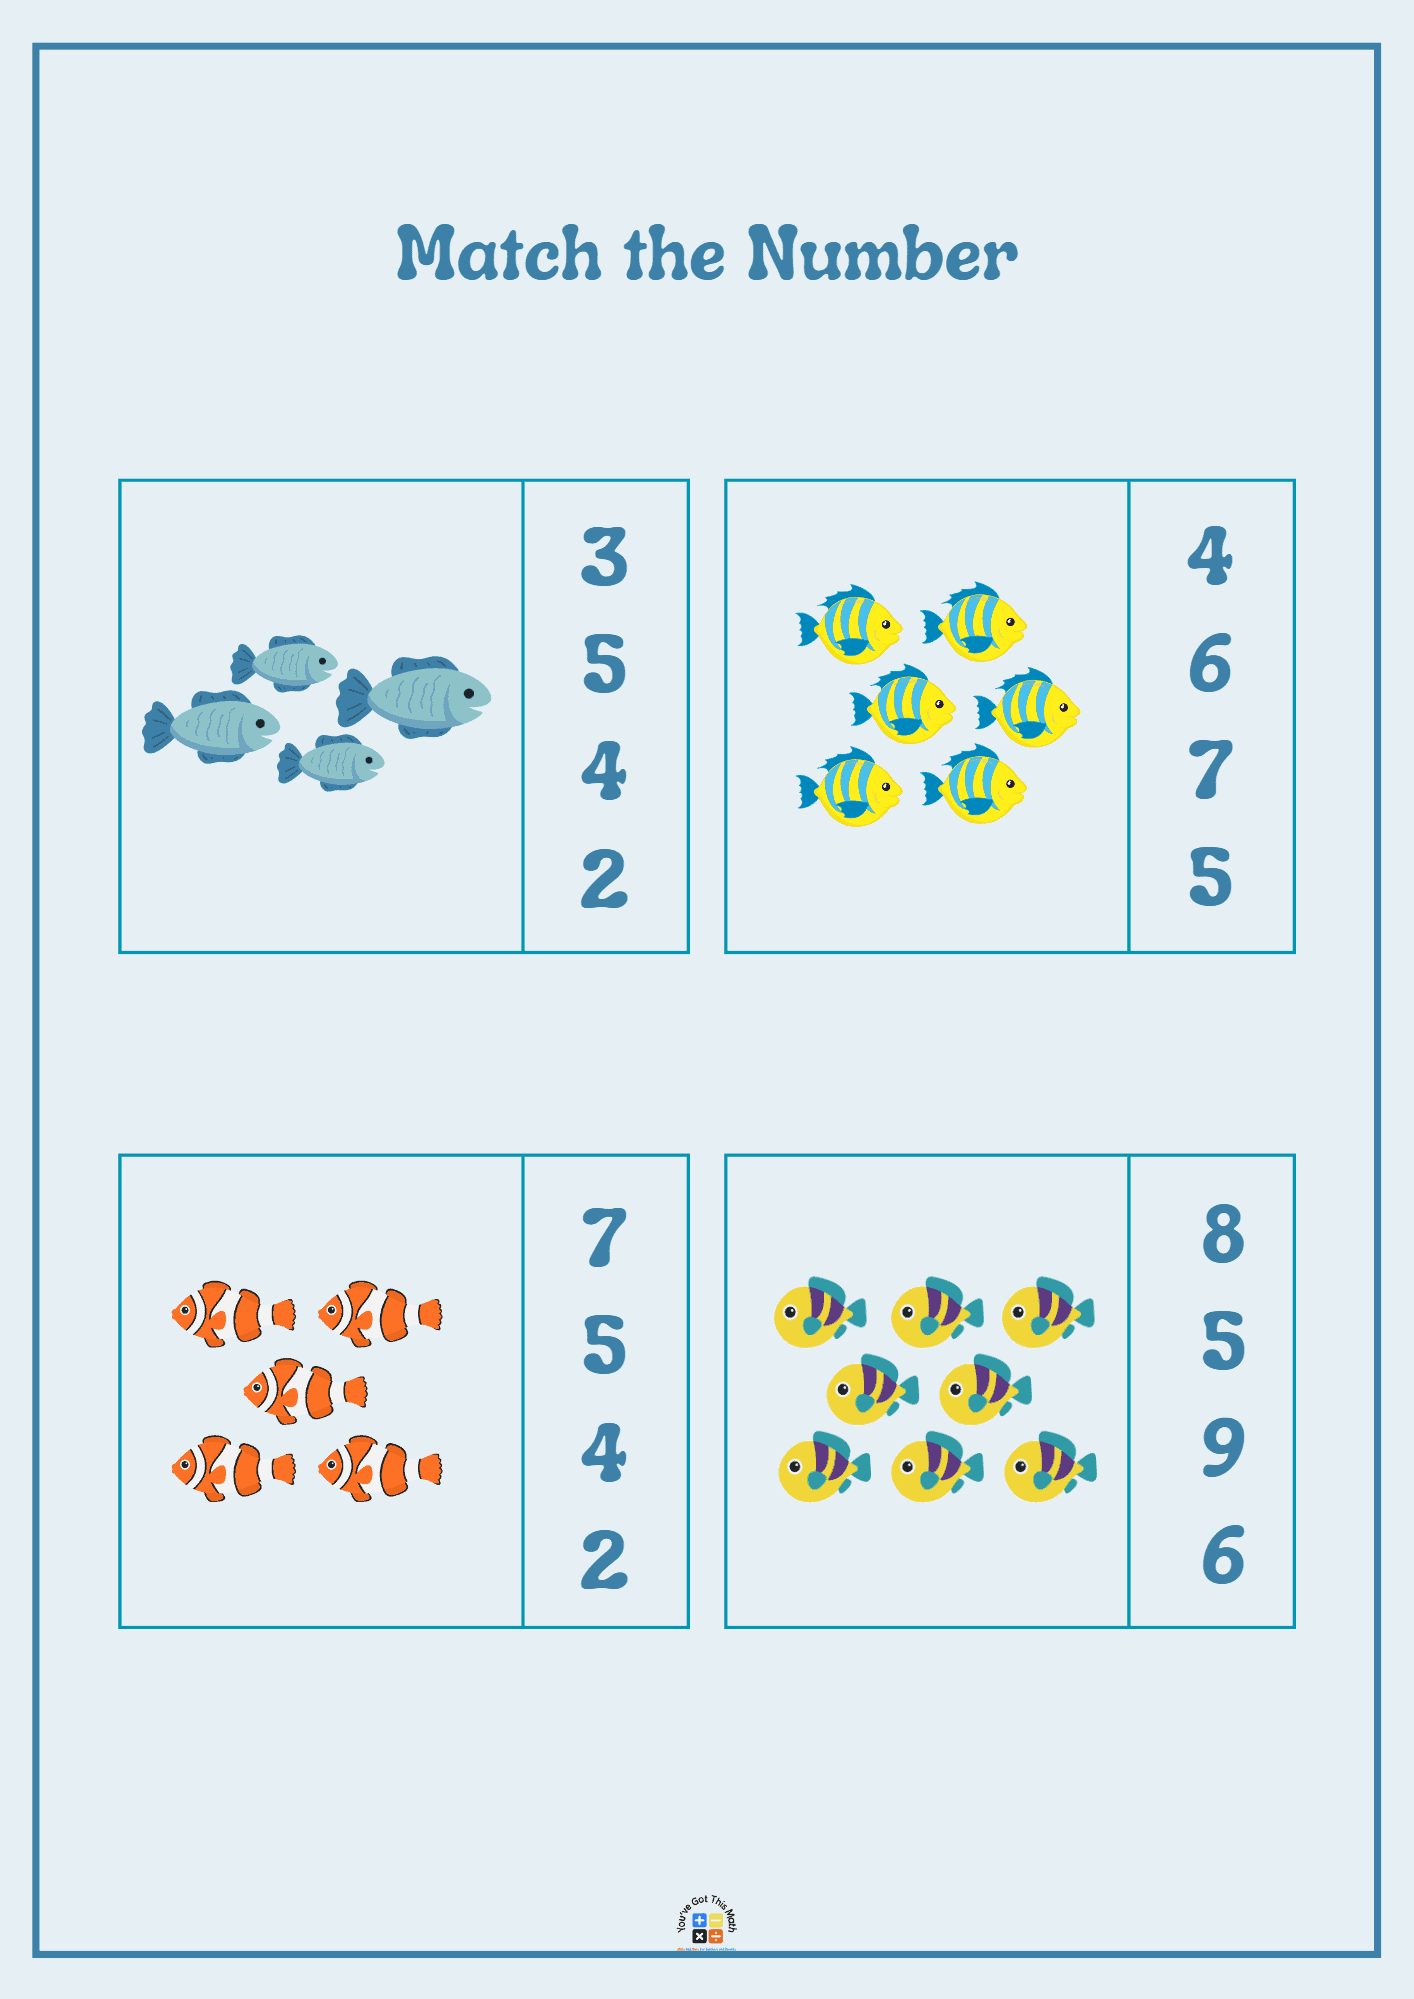 Match the number in Counting Fish game